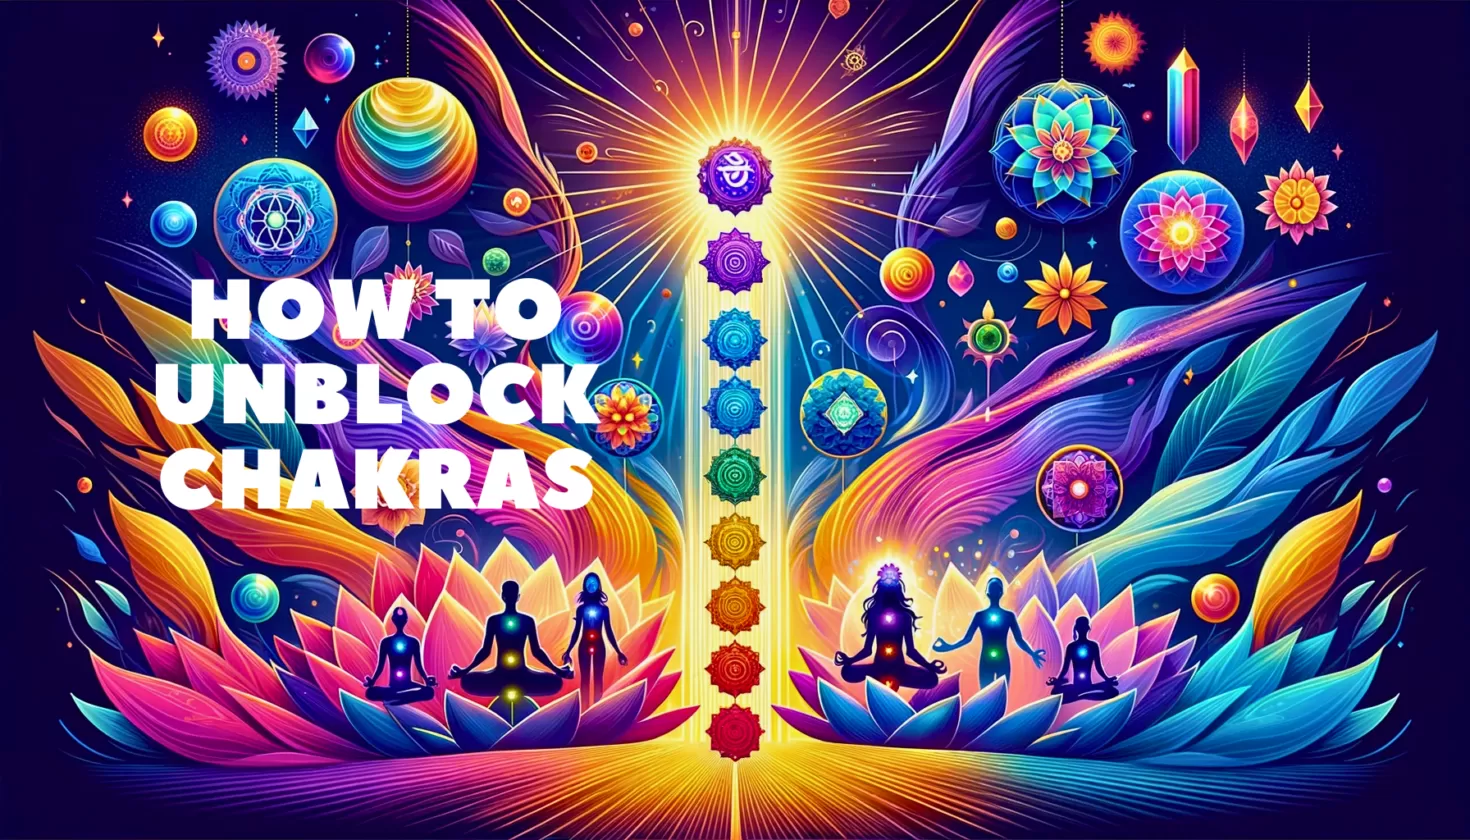 Visual guide on how to unblock chakras, featuring symbols of the seven energy centers and healing techniques